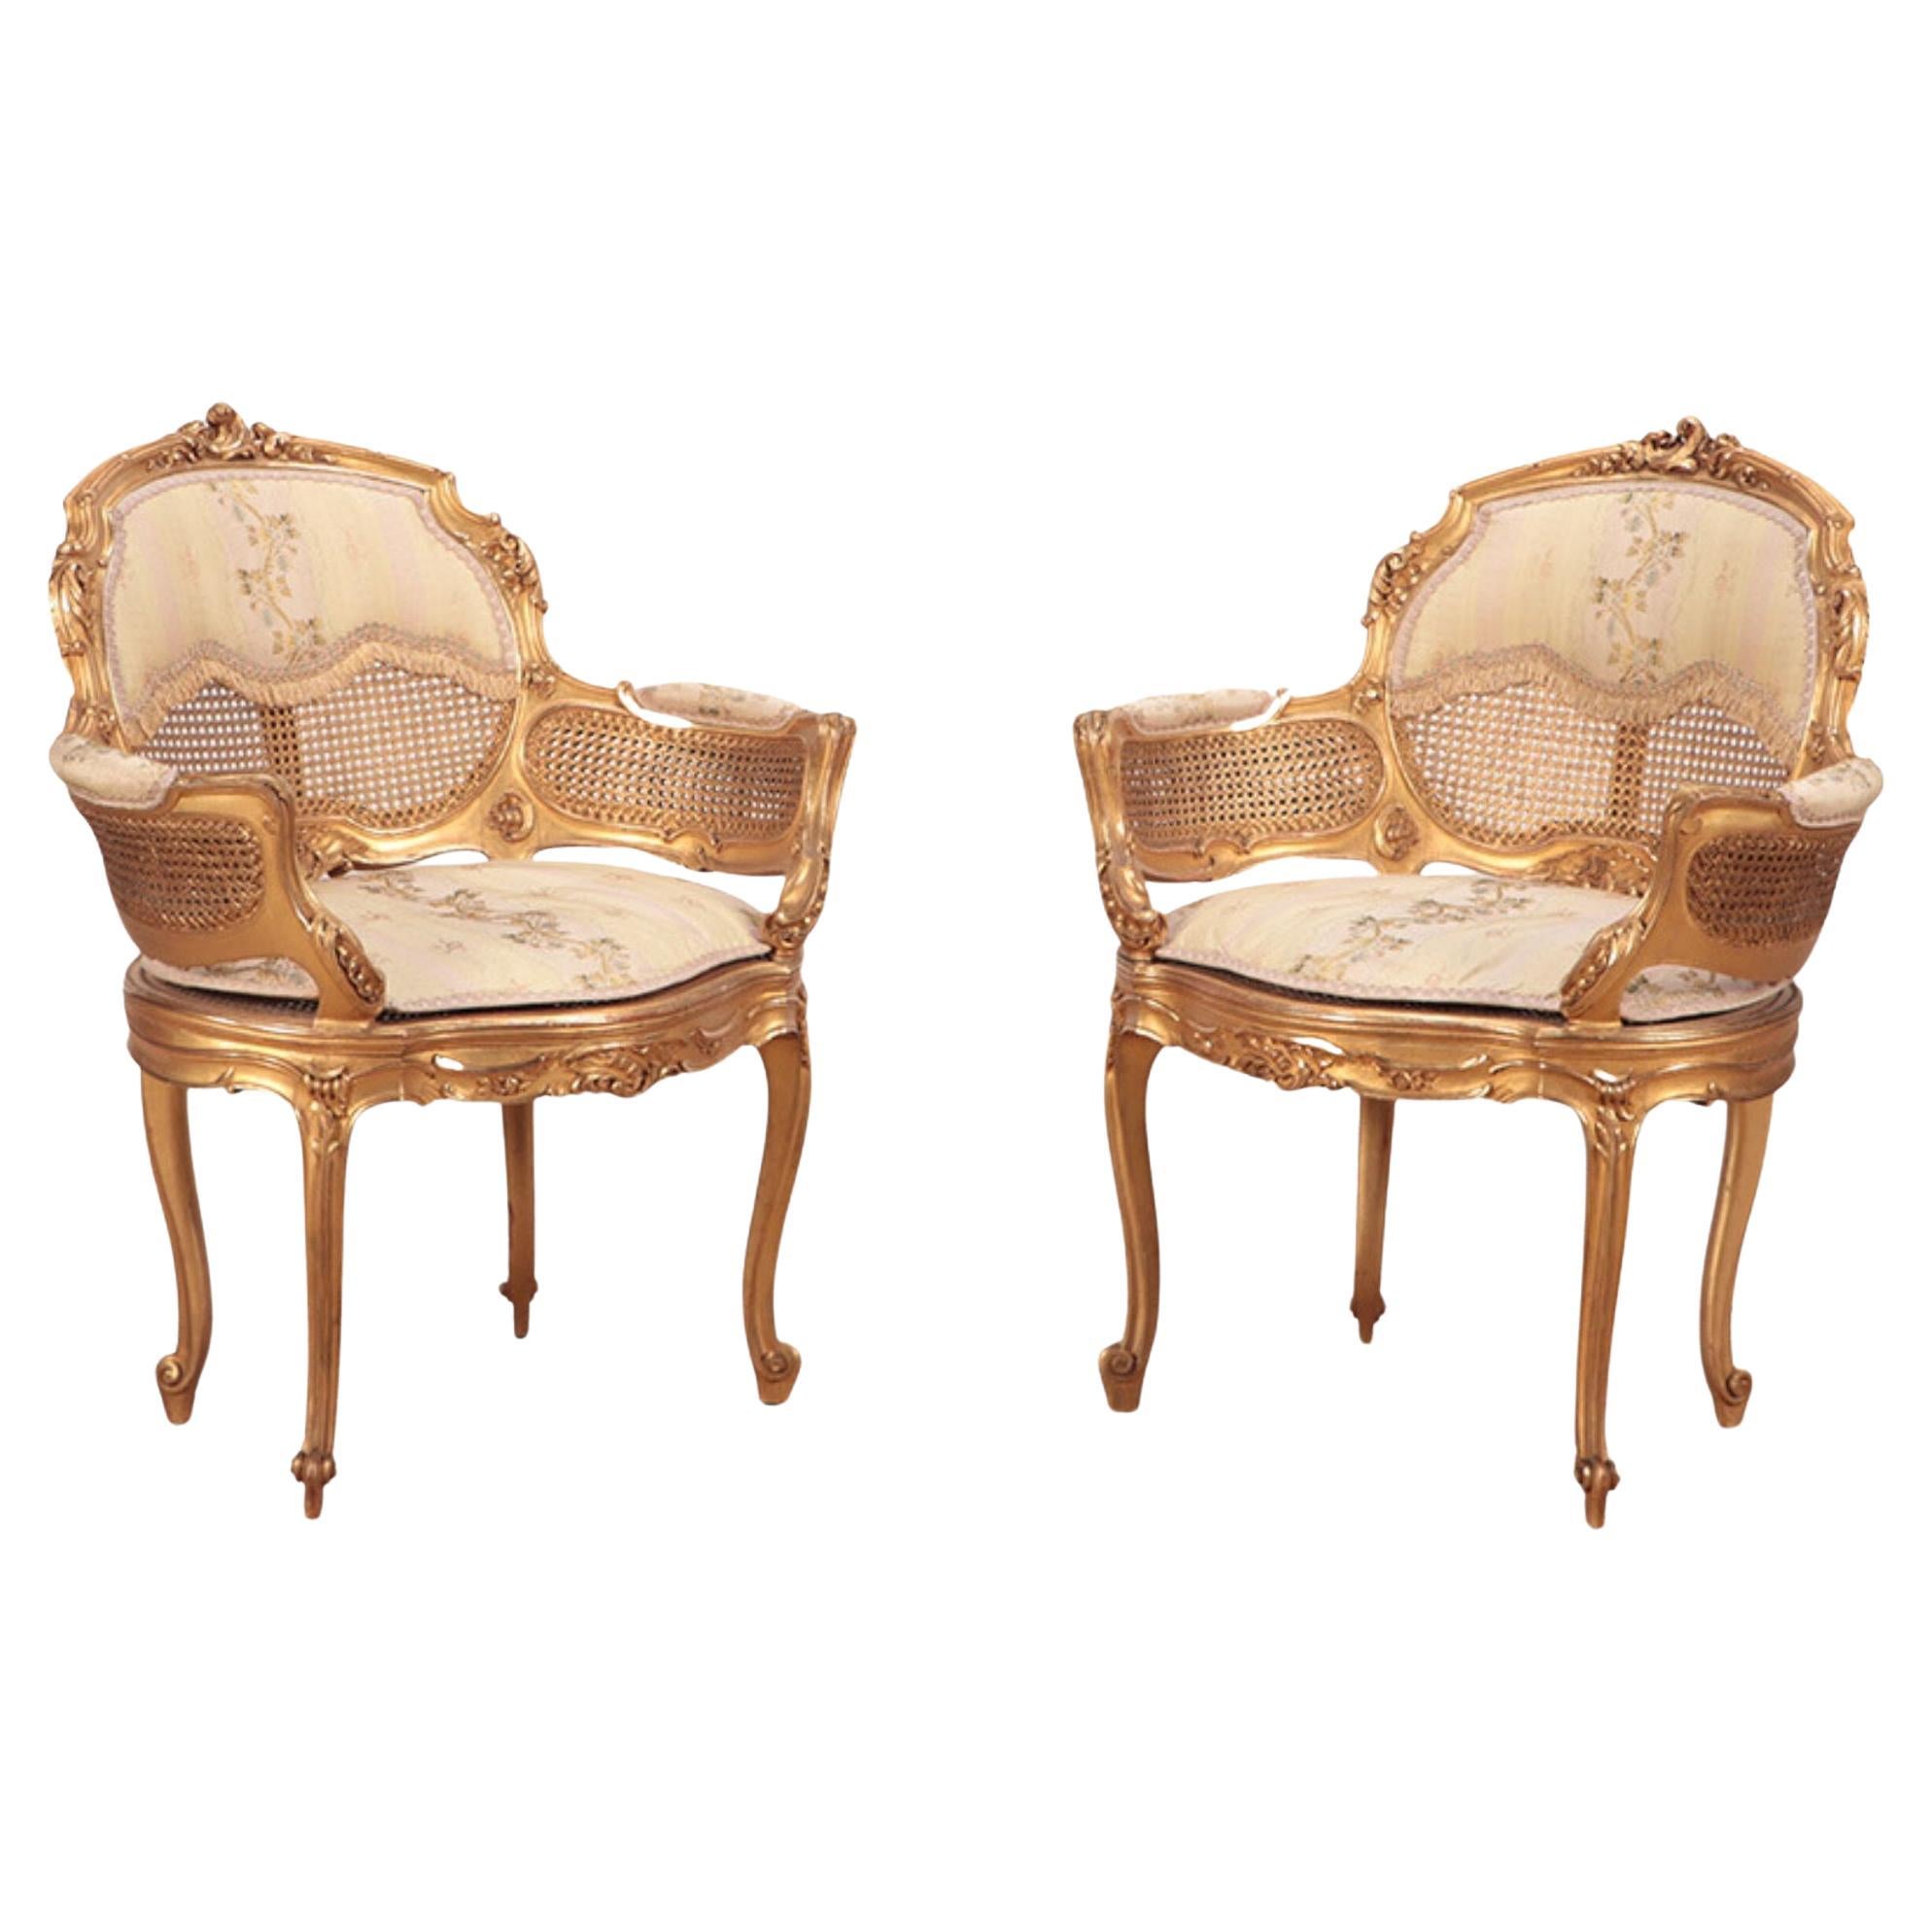 Pair of Giltwood and Carved French Louis XV Style Side Chairs, circa 1900